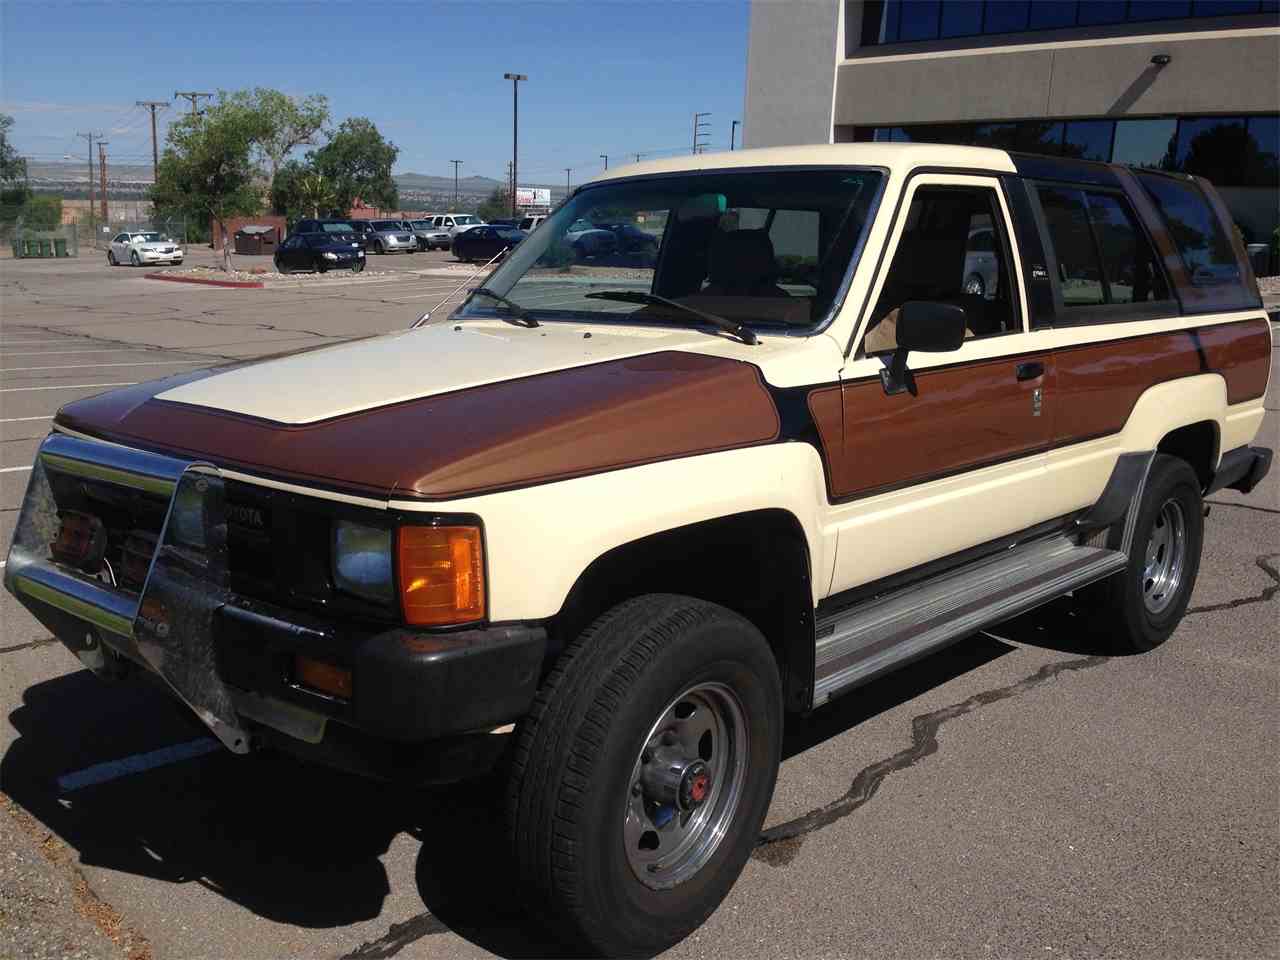 4Runner, Why does this ’85 4Runner look so different?, ClassicCars.com Journal